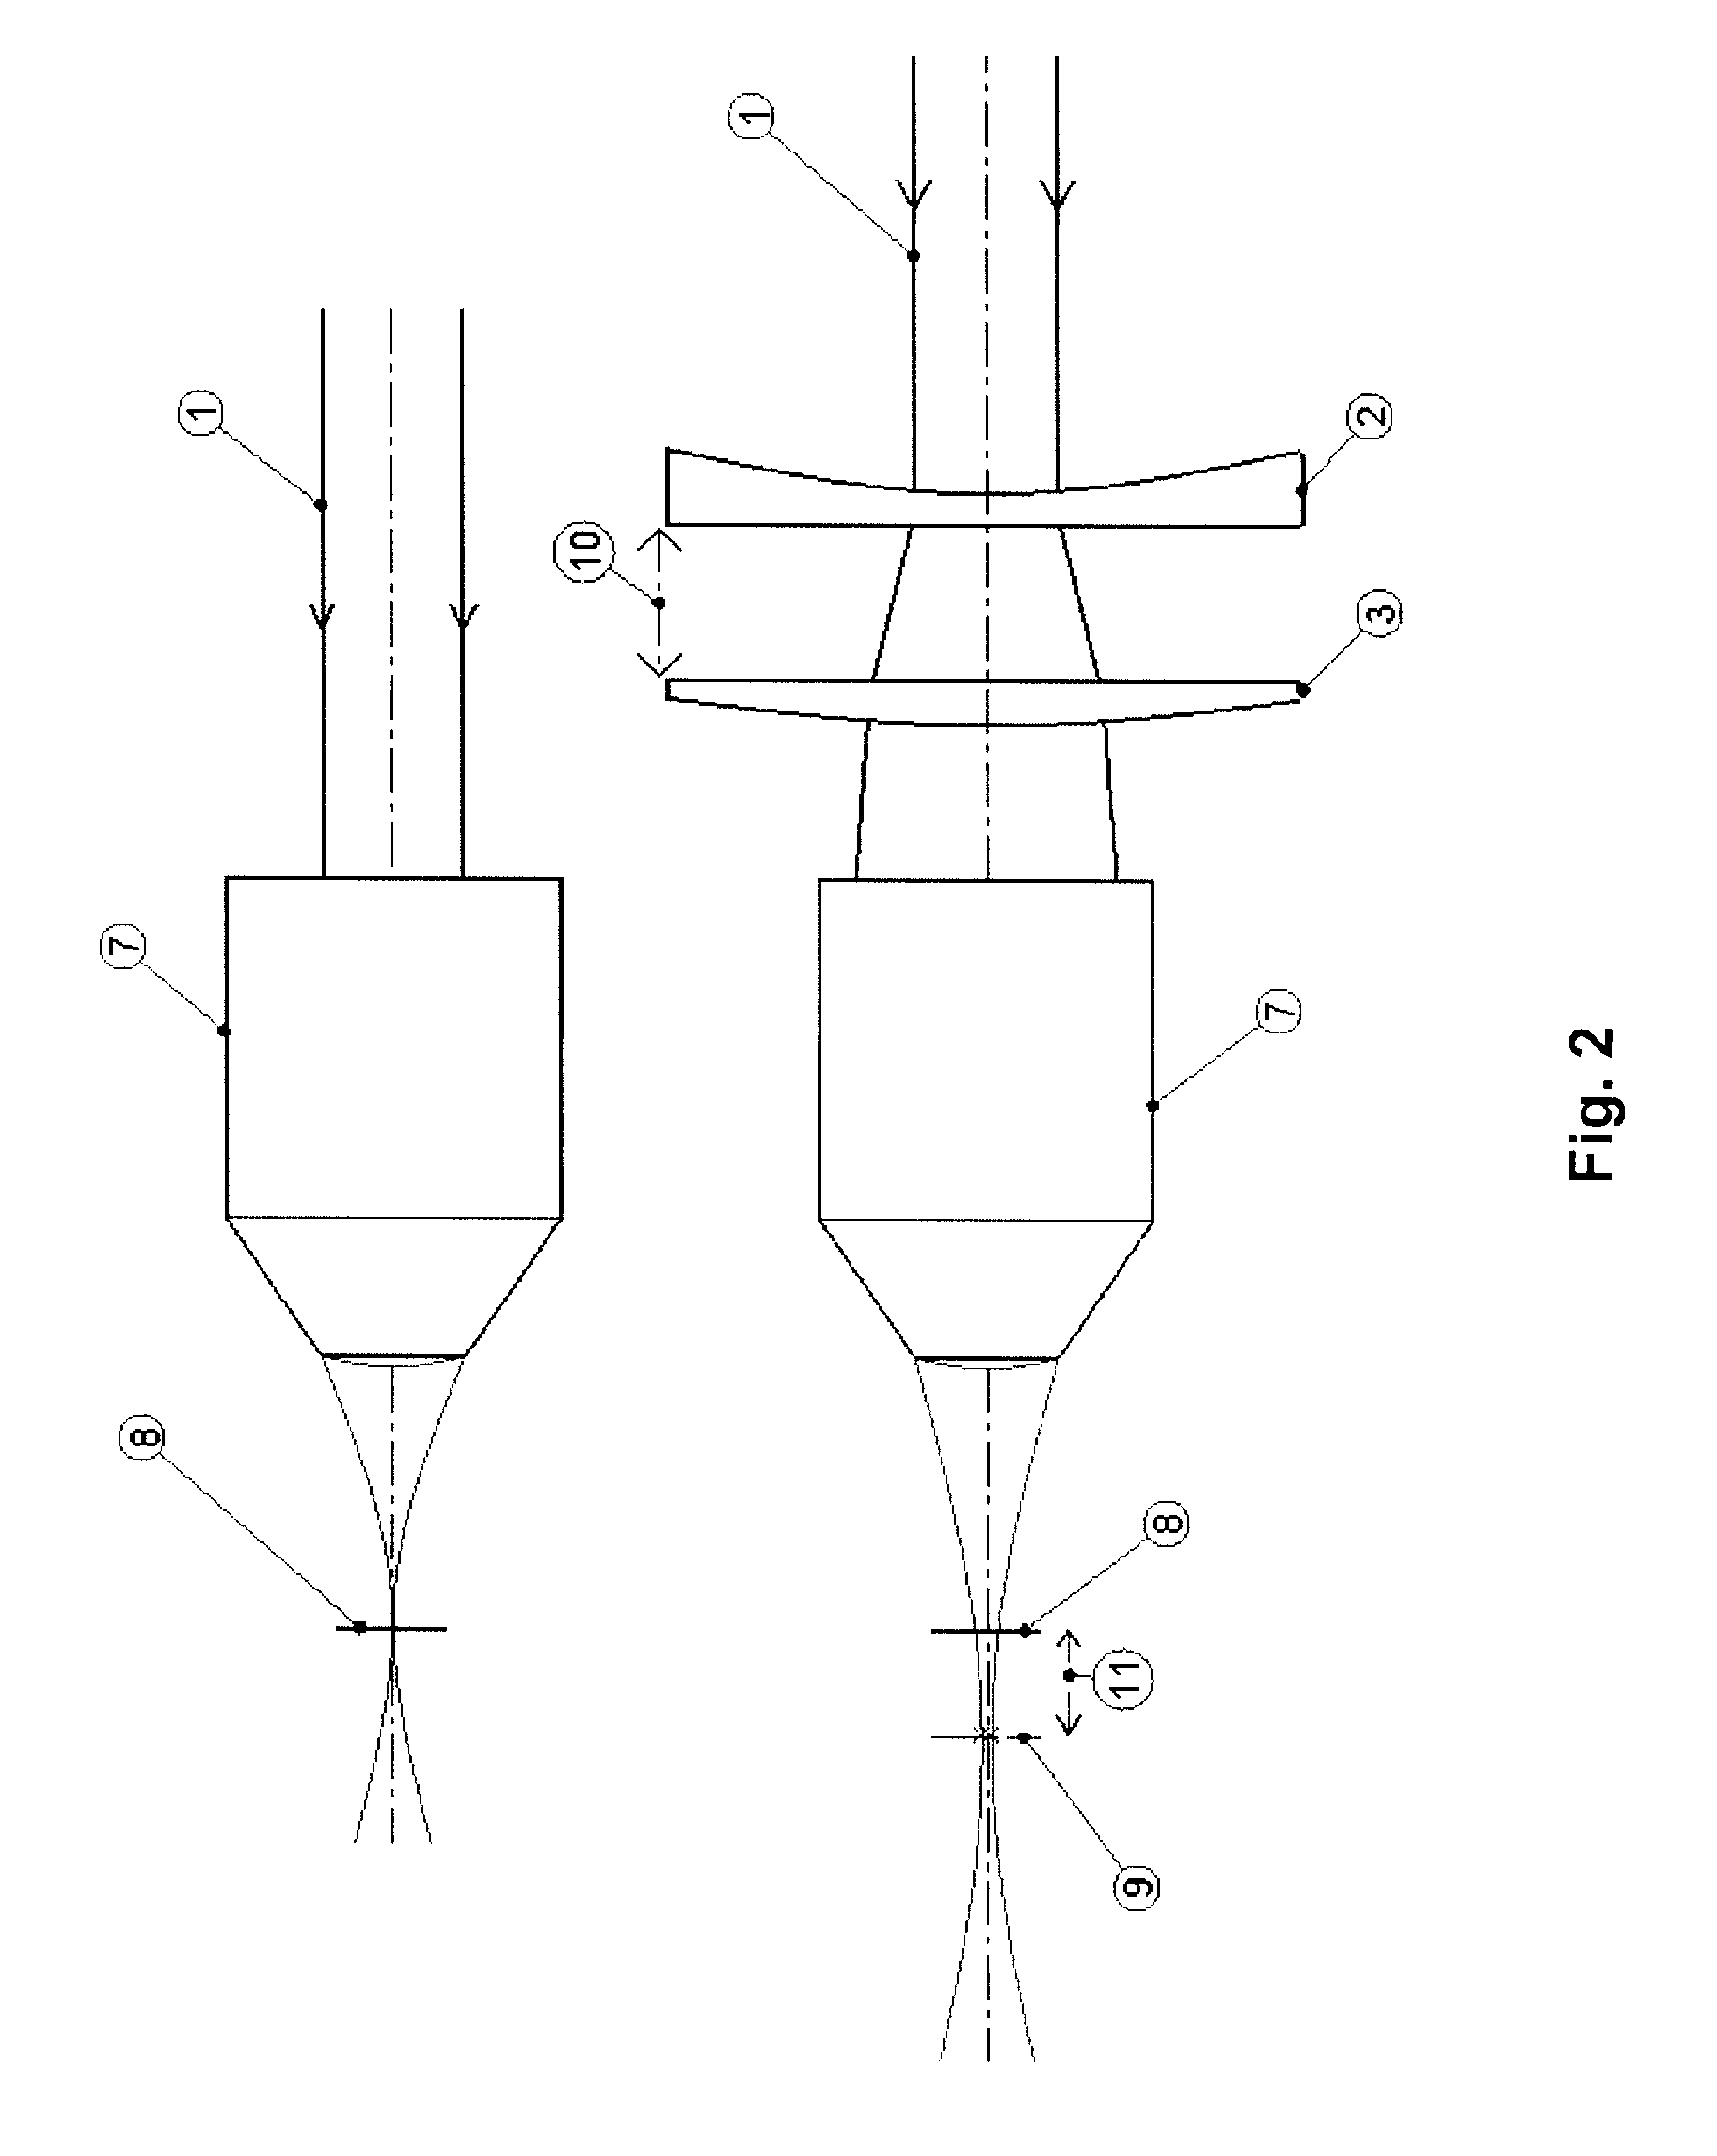 Method and apparatus for detecting fluorescence emitted by particle-bound fluorophores confined by particle traps